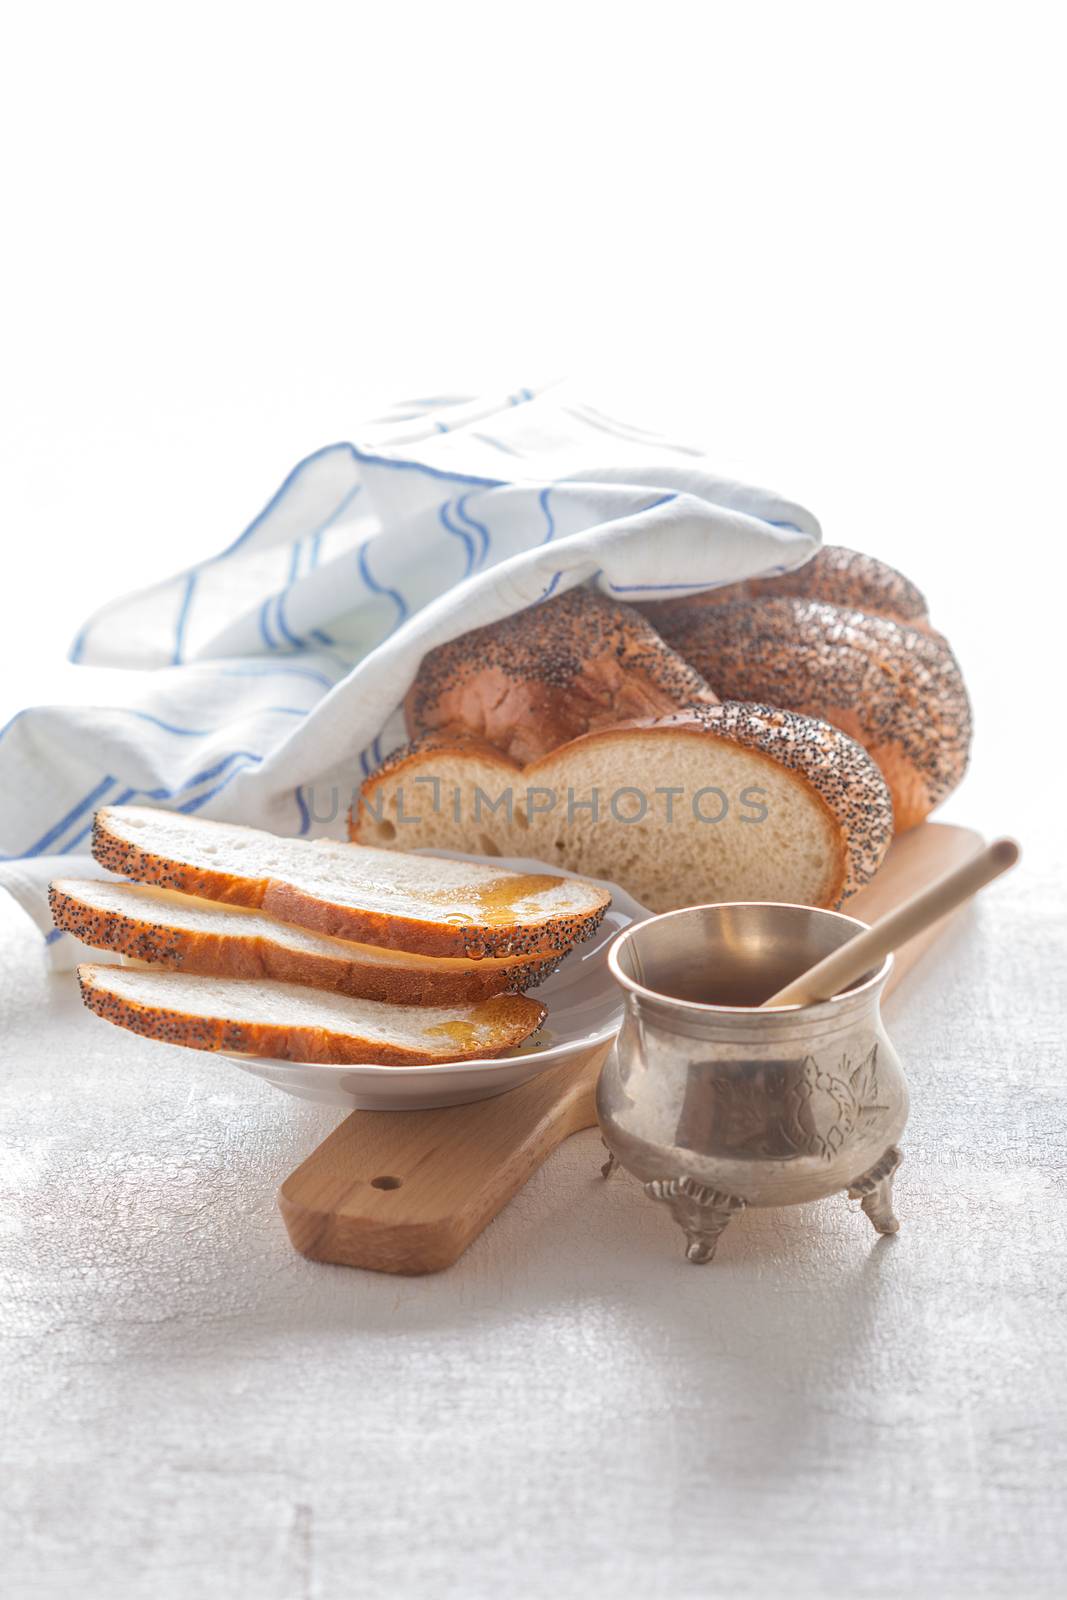 Braided Challah bread and honey  by supercat67